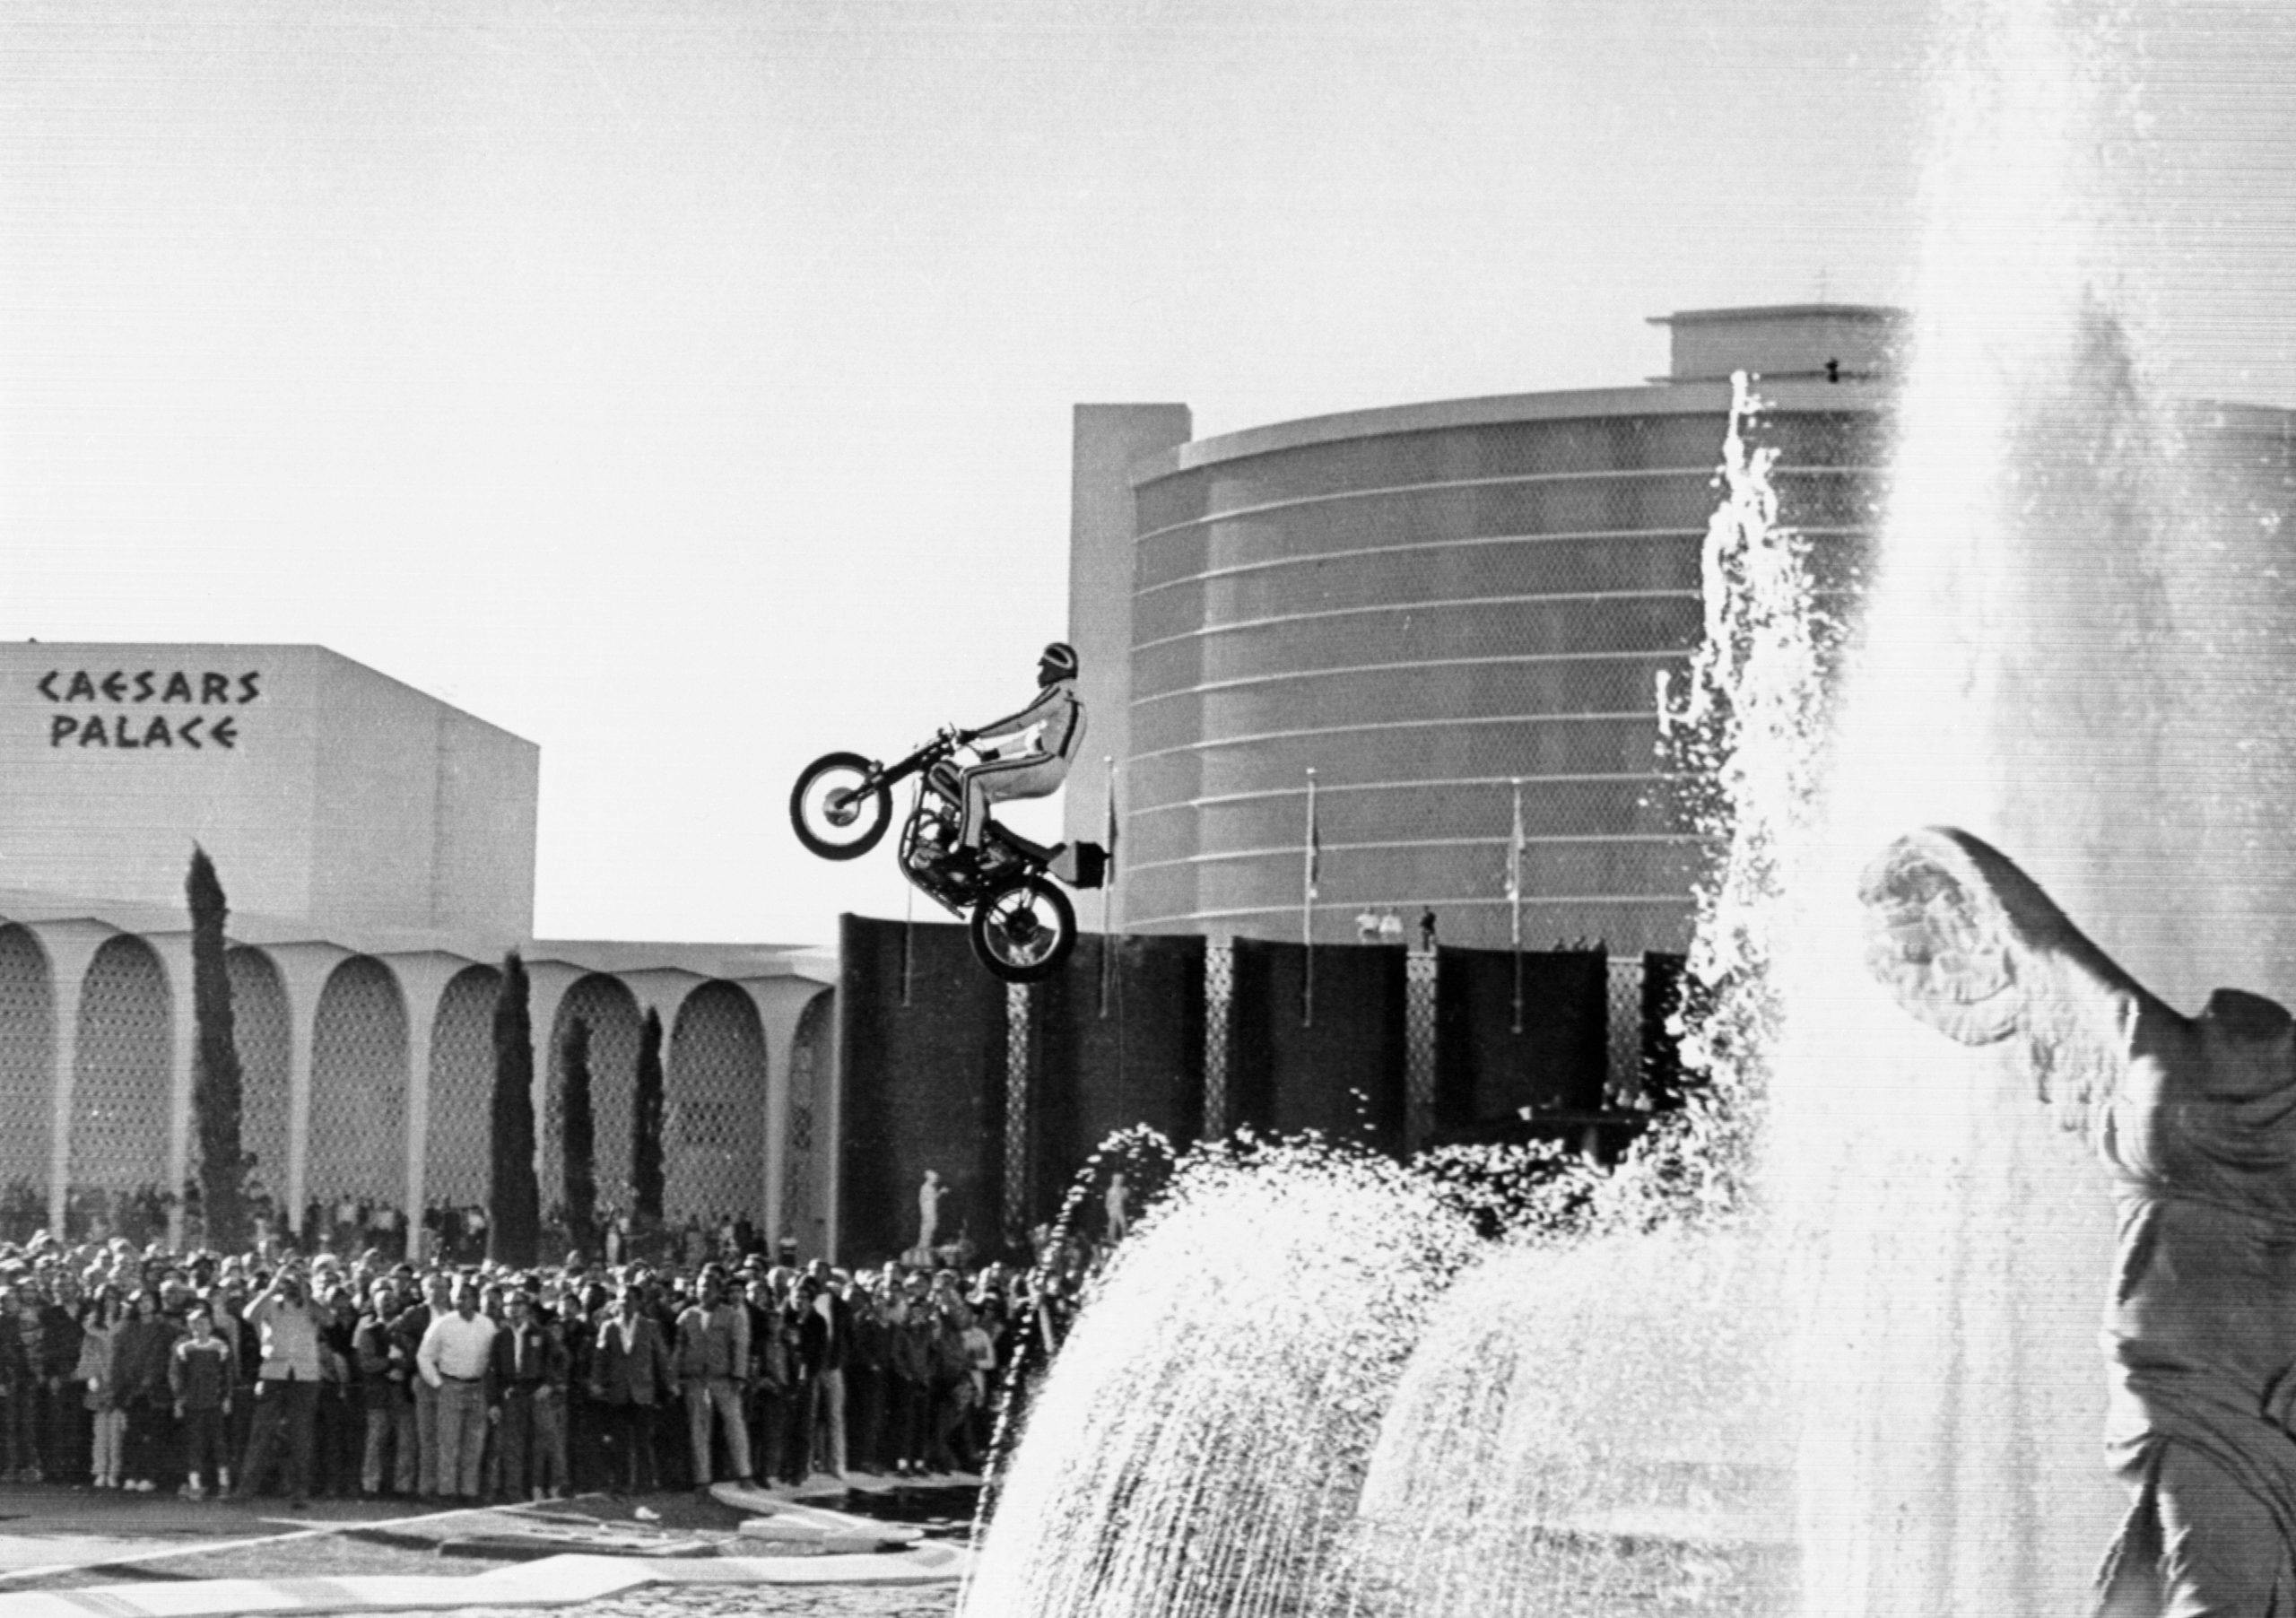 Evel Knievel Jumping Motorcycle over Caesars Palace Fountain